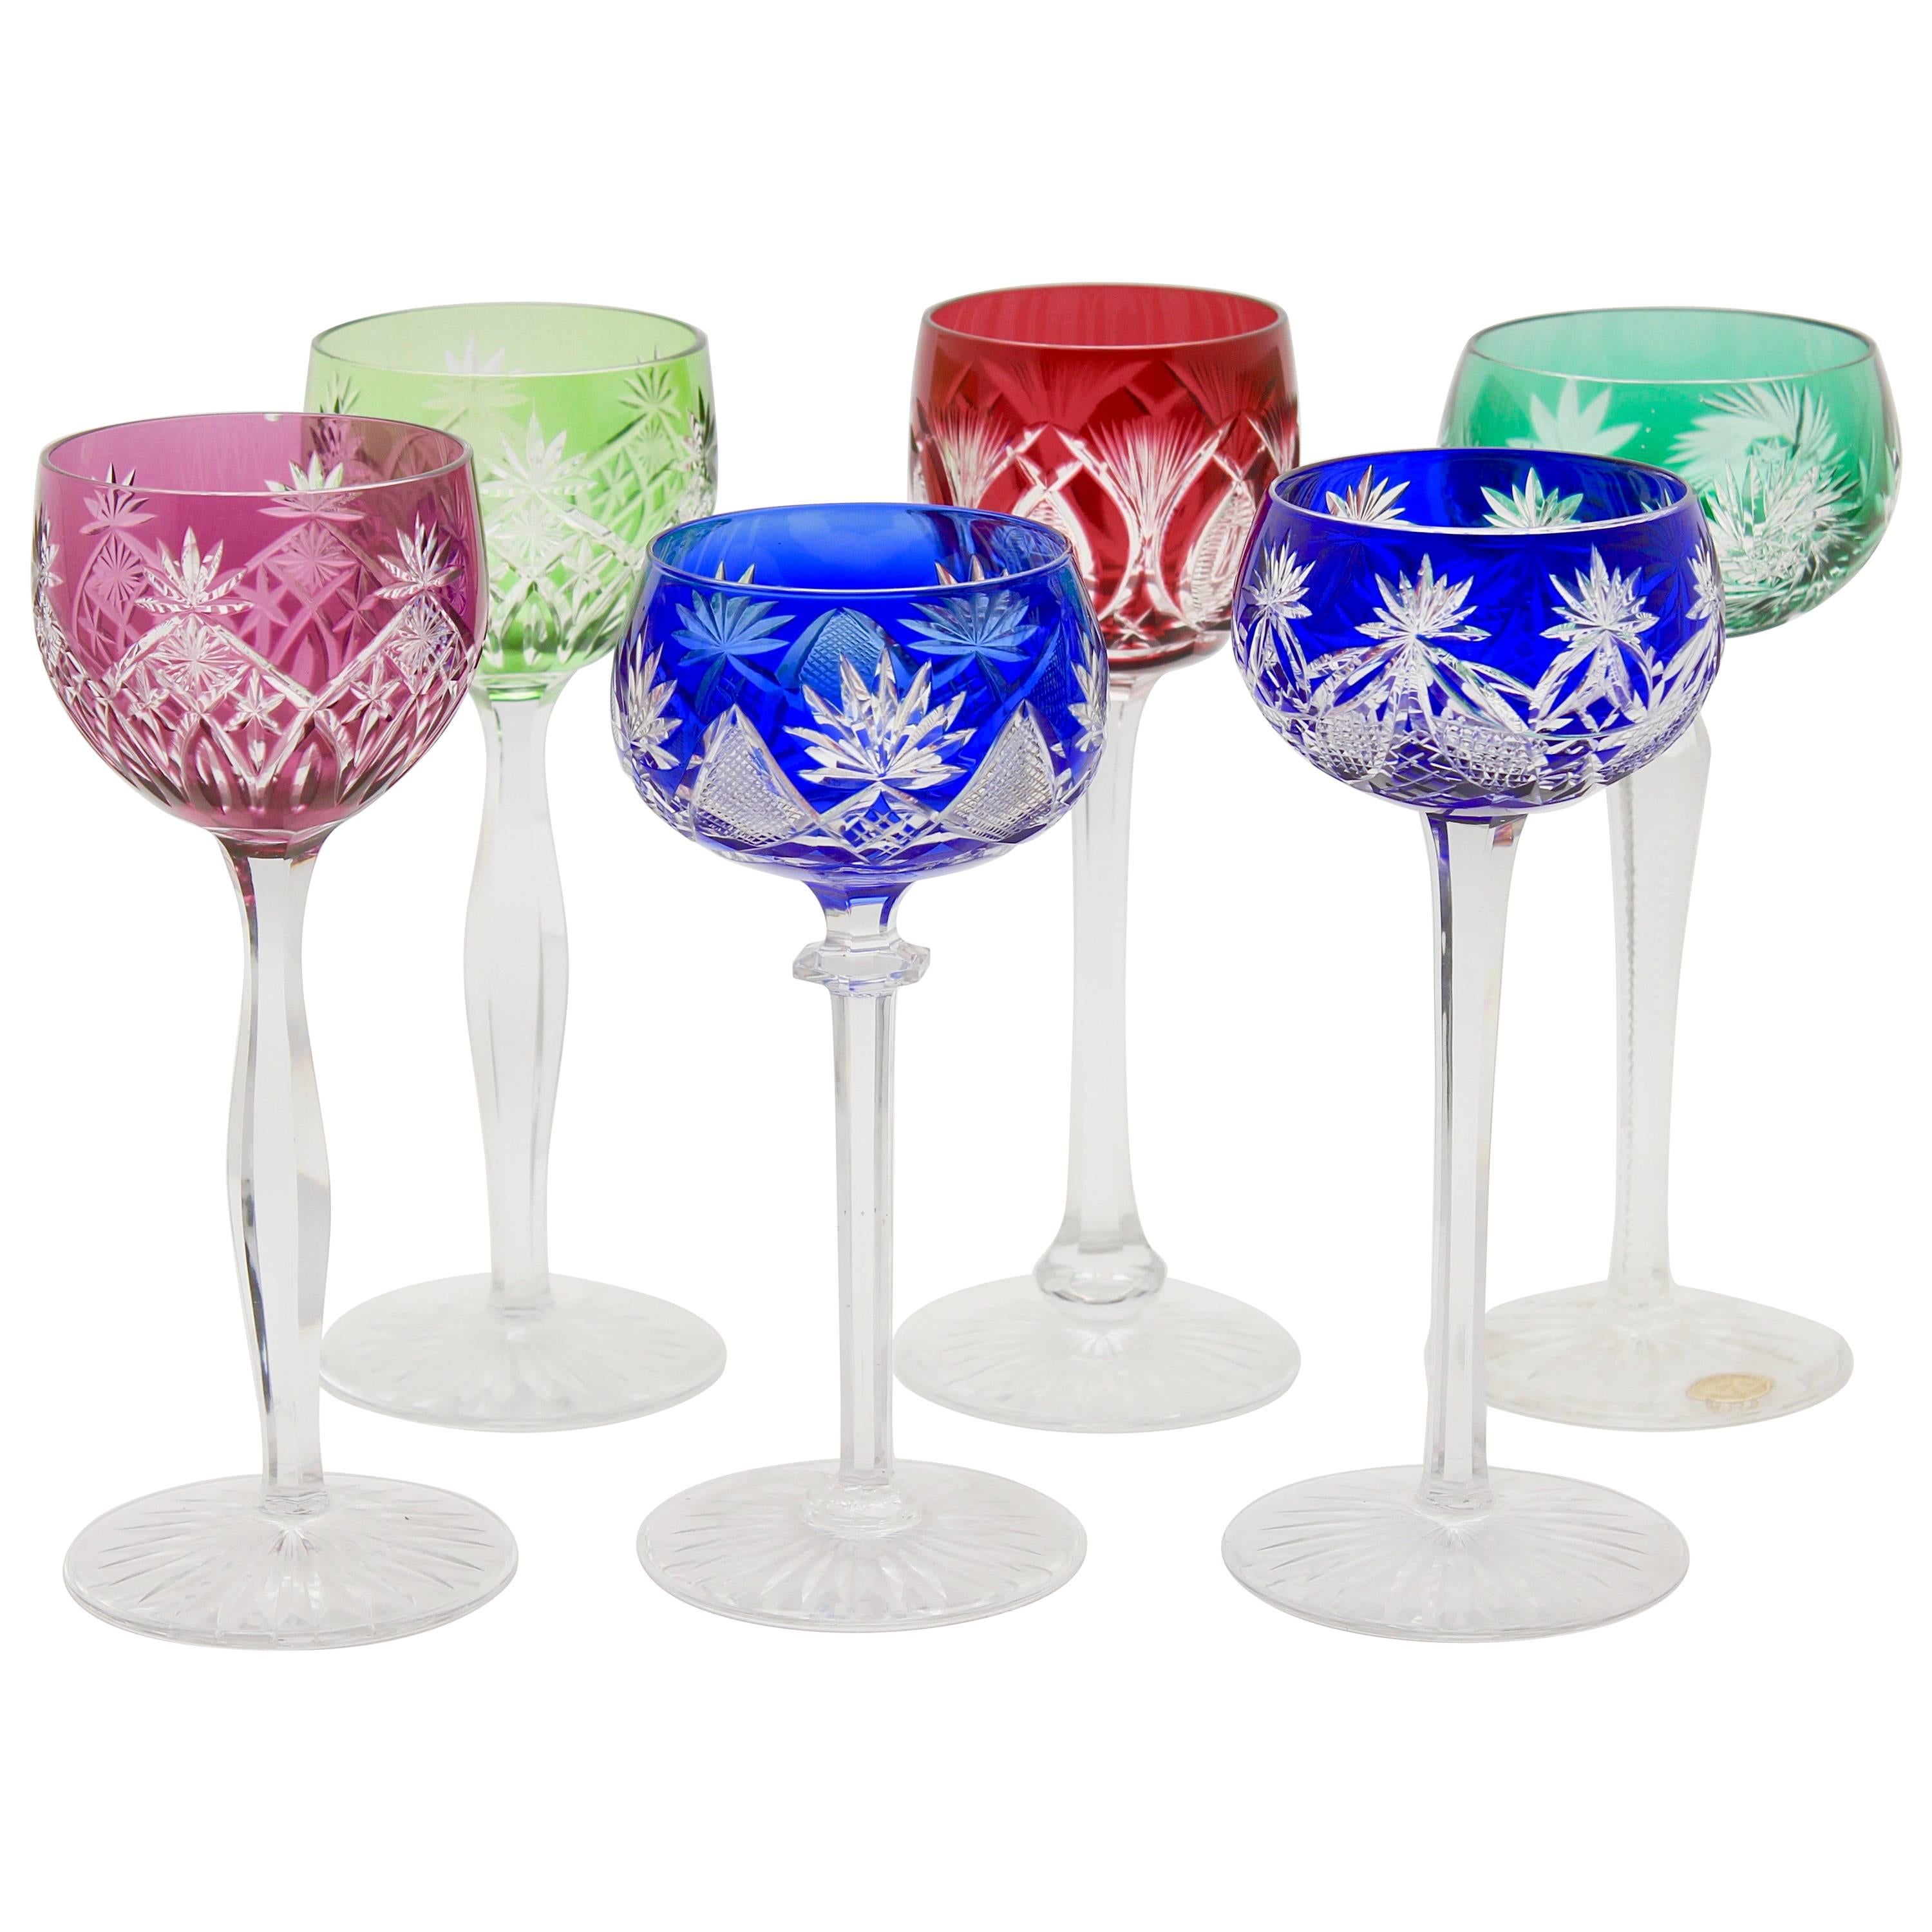 https://a.1stdibscdn.com/crystal-set-of-six-lausitzer-stem-glasses-with-colored-overlay-cut-to-clear-for-sale/1121189/f_107959131526546218821/10795913_master.jpg